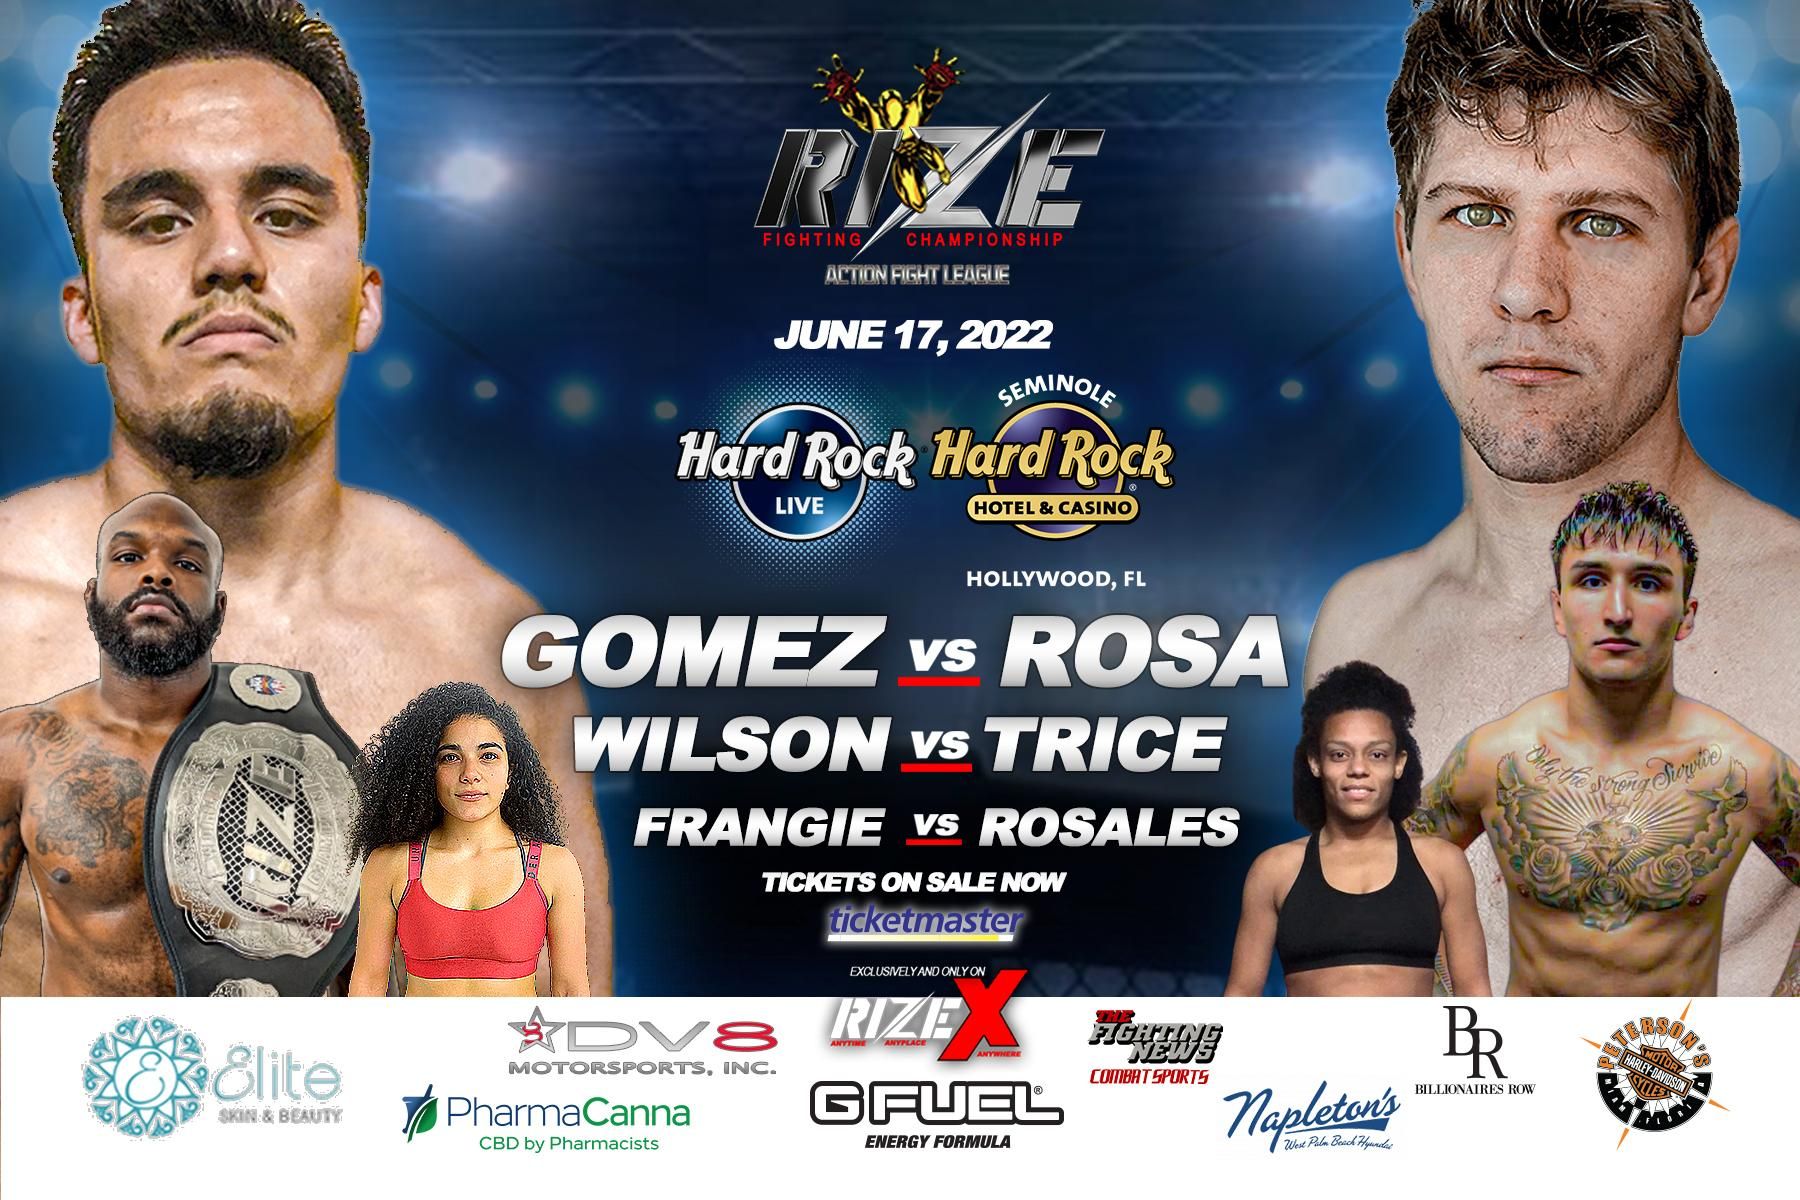 CEO of RIZE Fighting Championships Armando Gonzalez is bringing LIVE MMA to HardRock LIVE in the Hardrock Hotel & Casino in Hollywood Florida June 17th